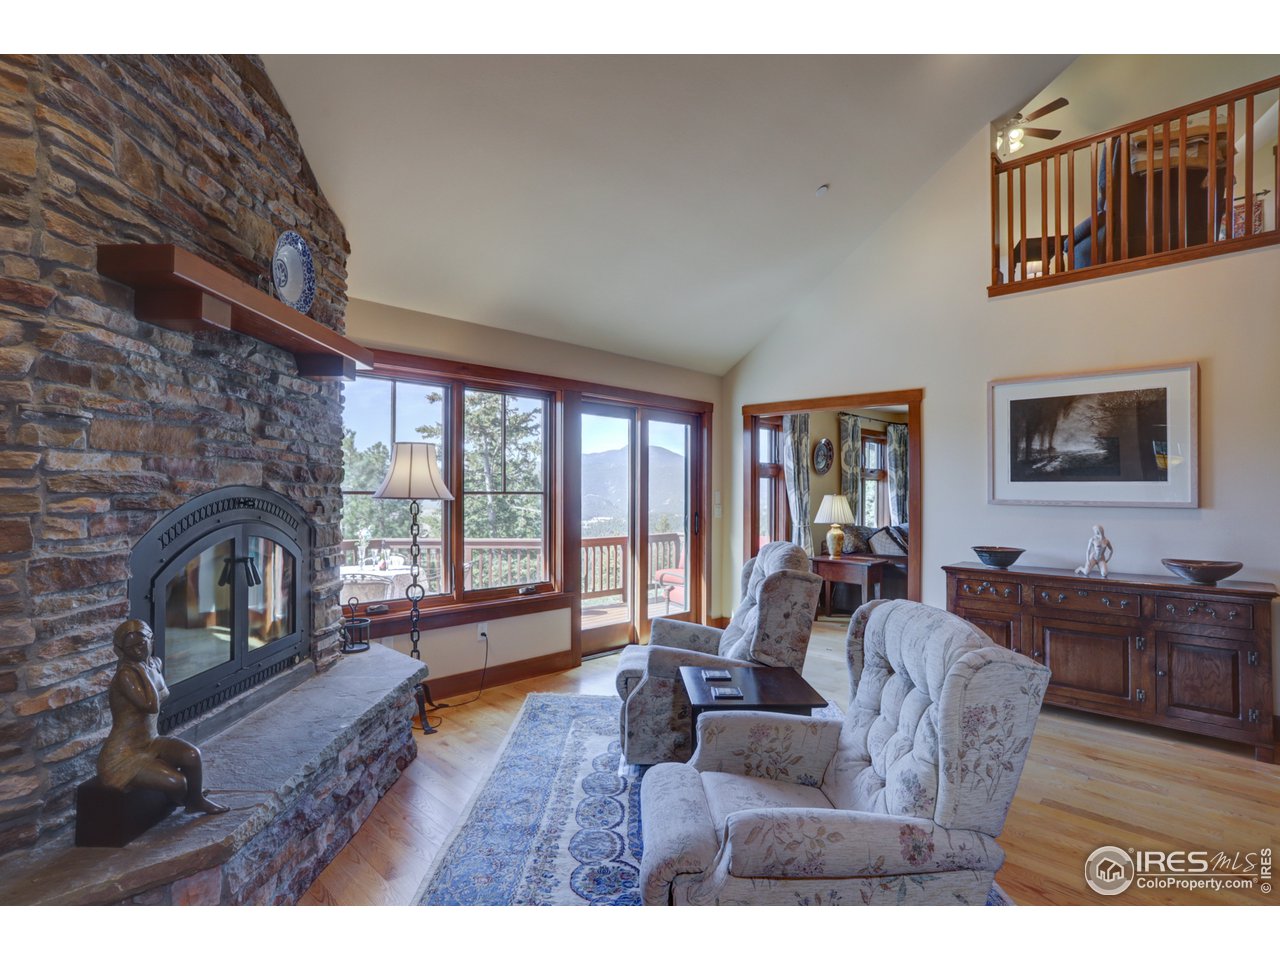 Living Room Features Gorgeous Fireplace, Incredible Views 